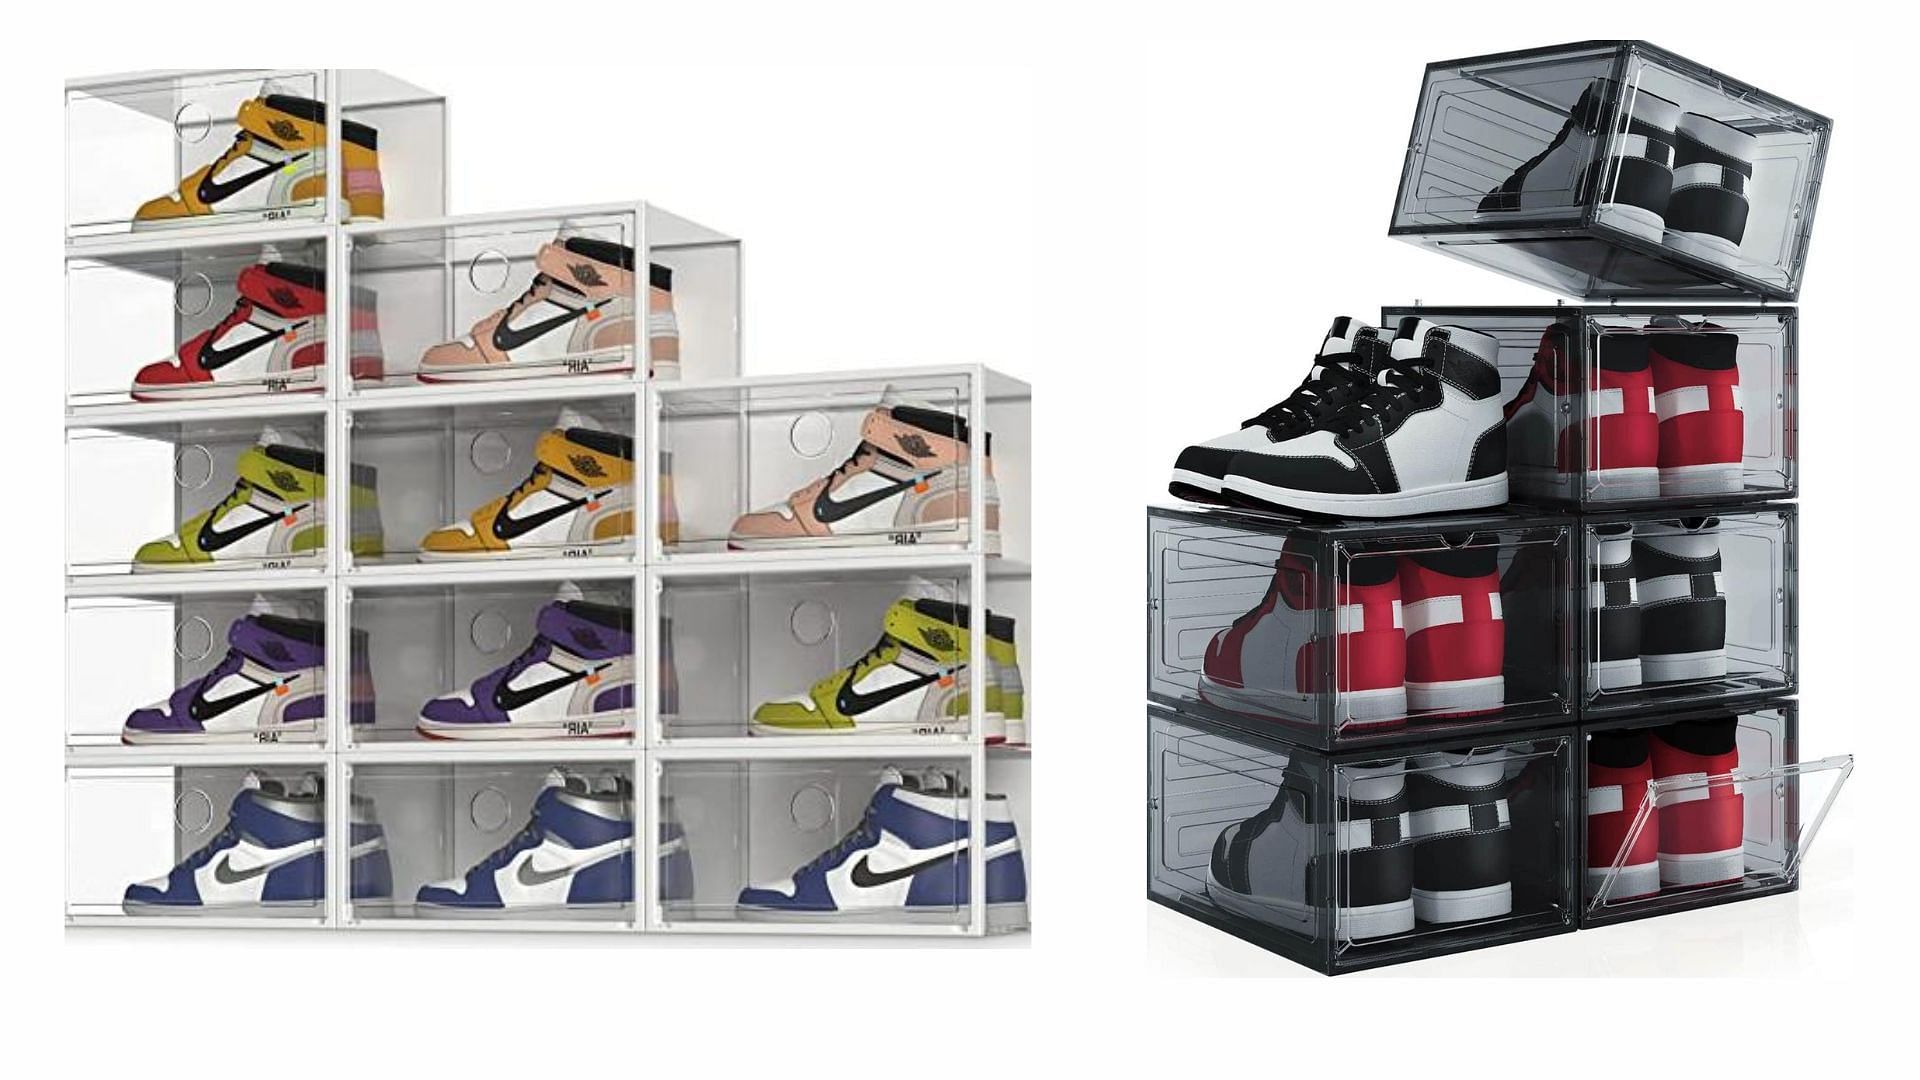 Take a closer look at the shoe boxes (Image via Twitter/@pacocha0lpq)